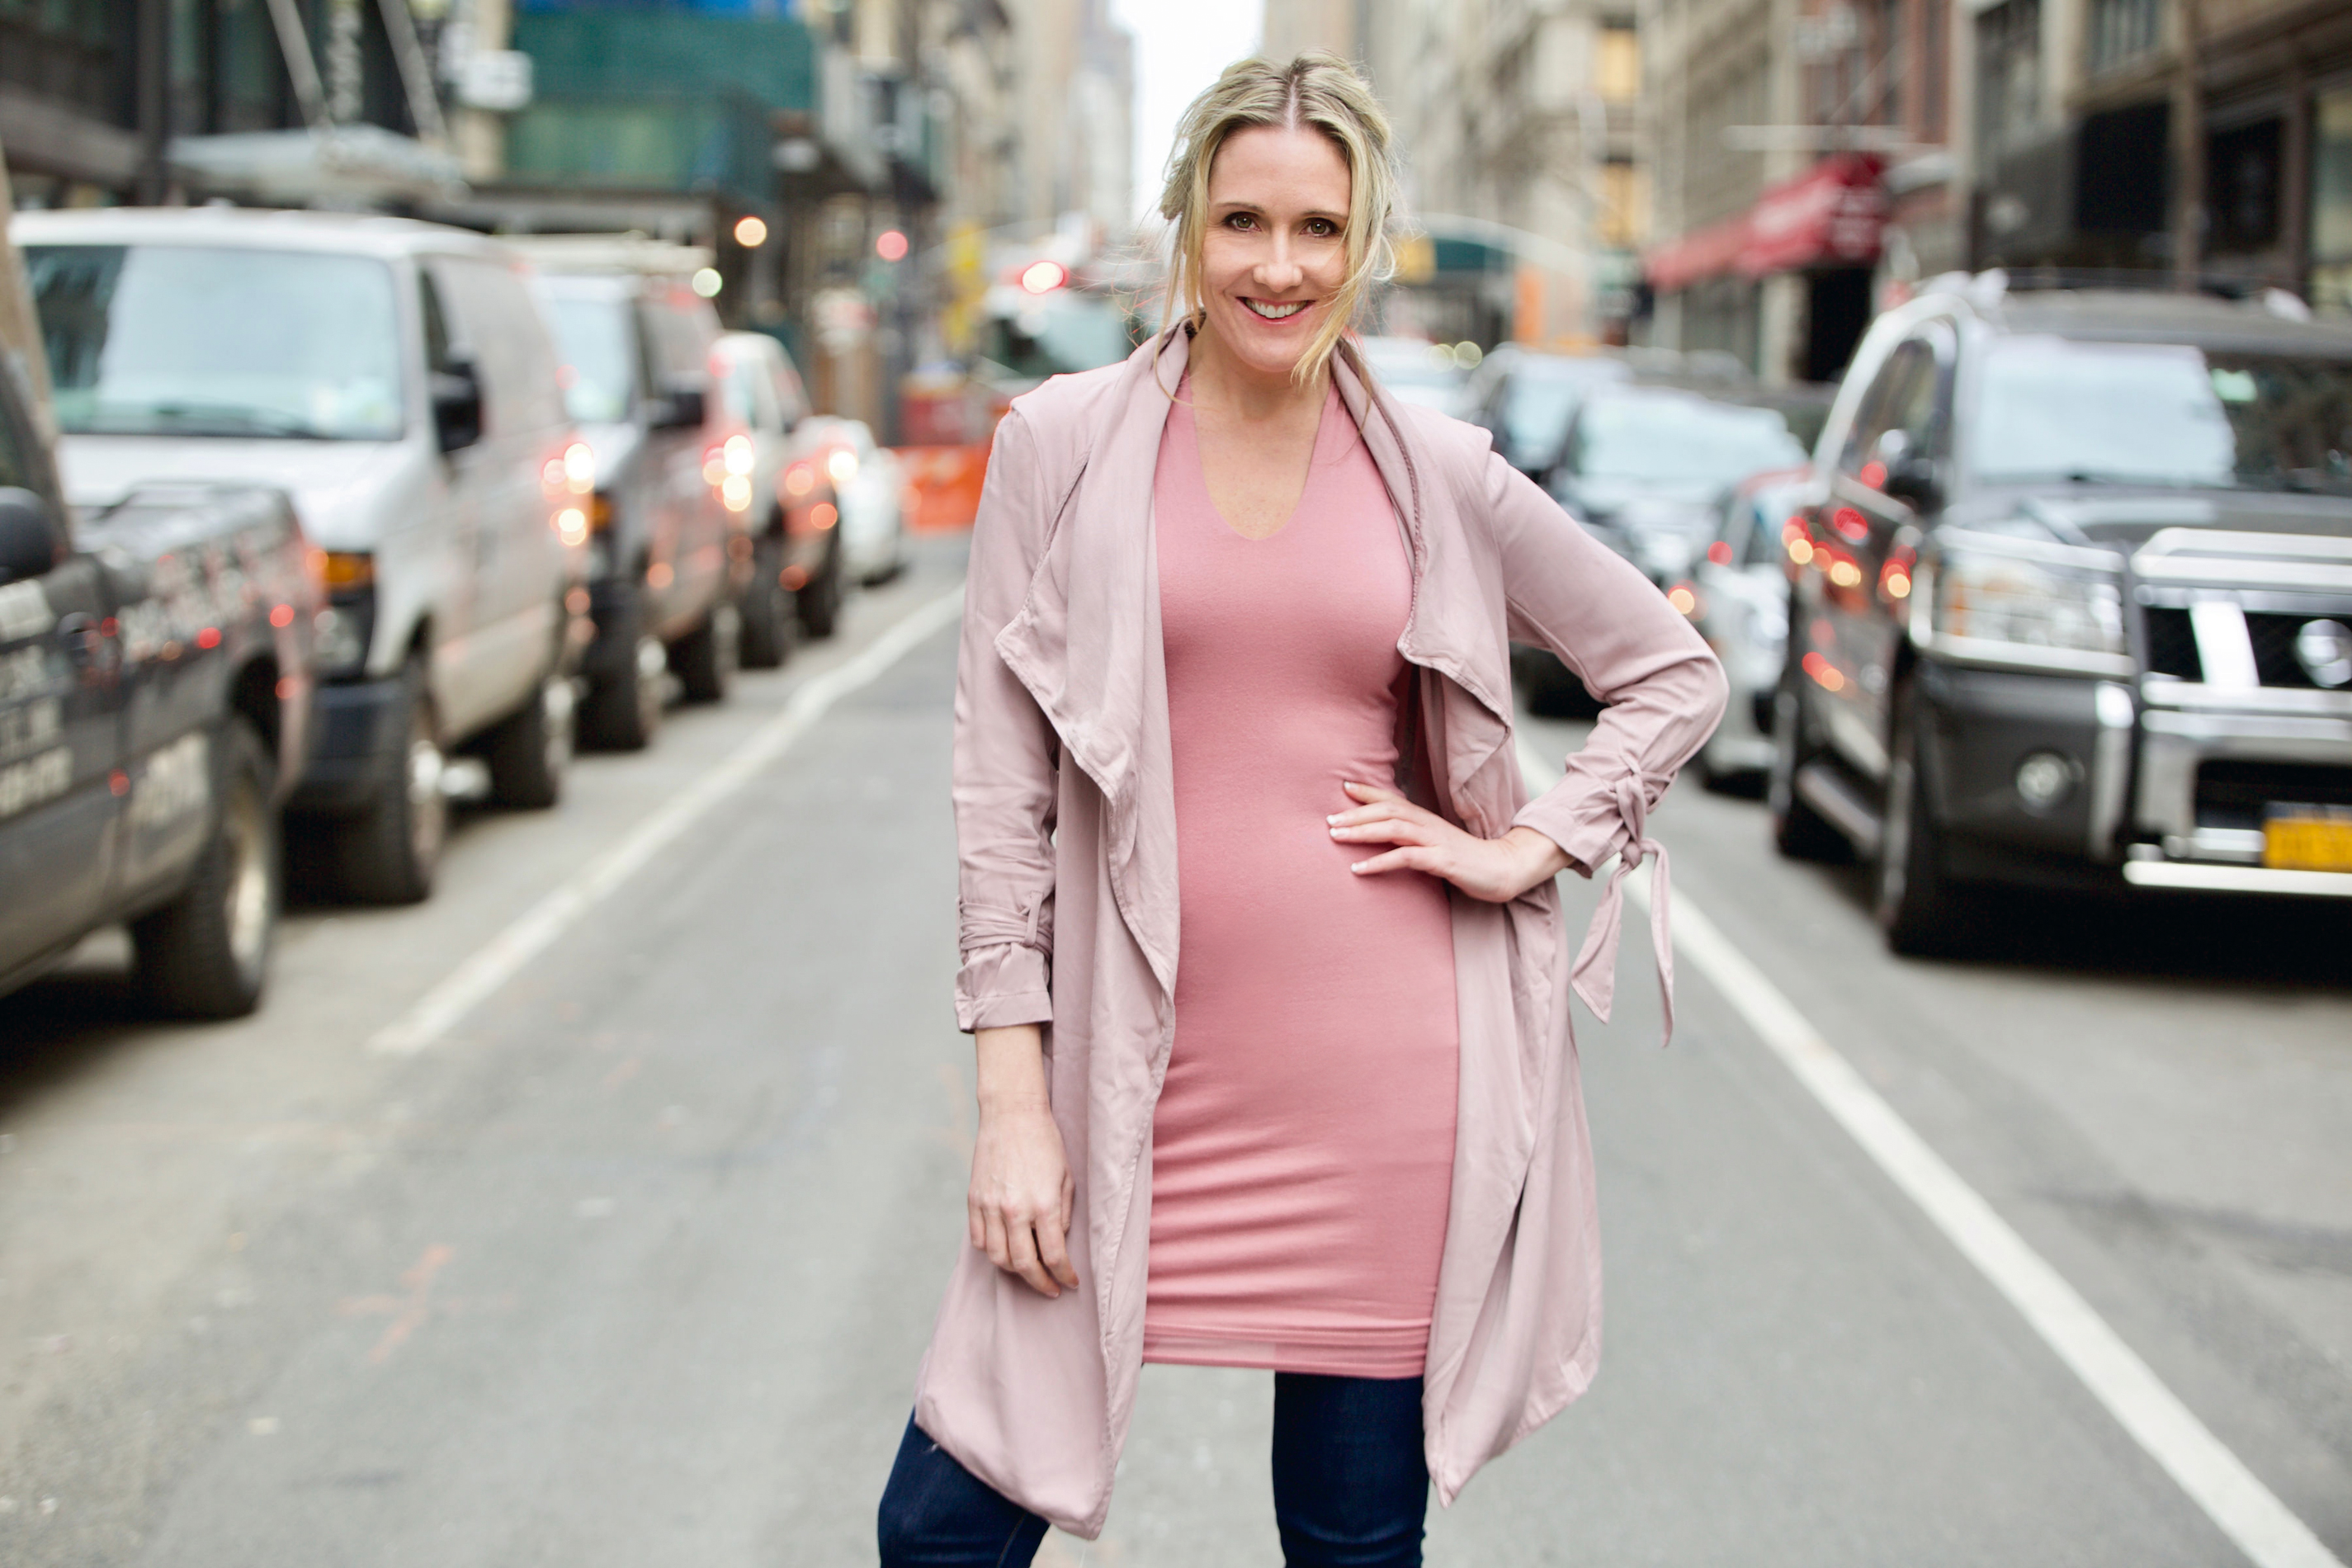 A woman in pink dress and jacket standing on the side of street.